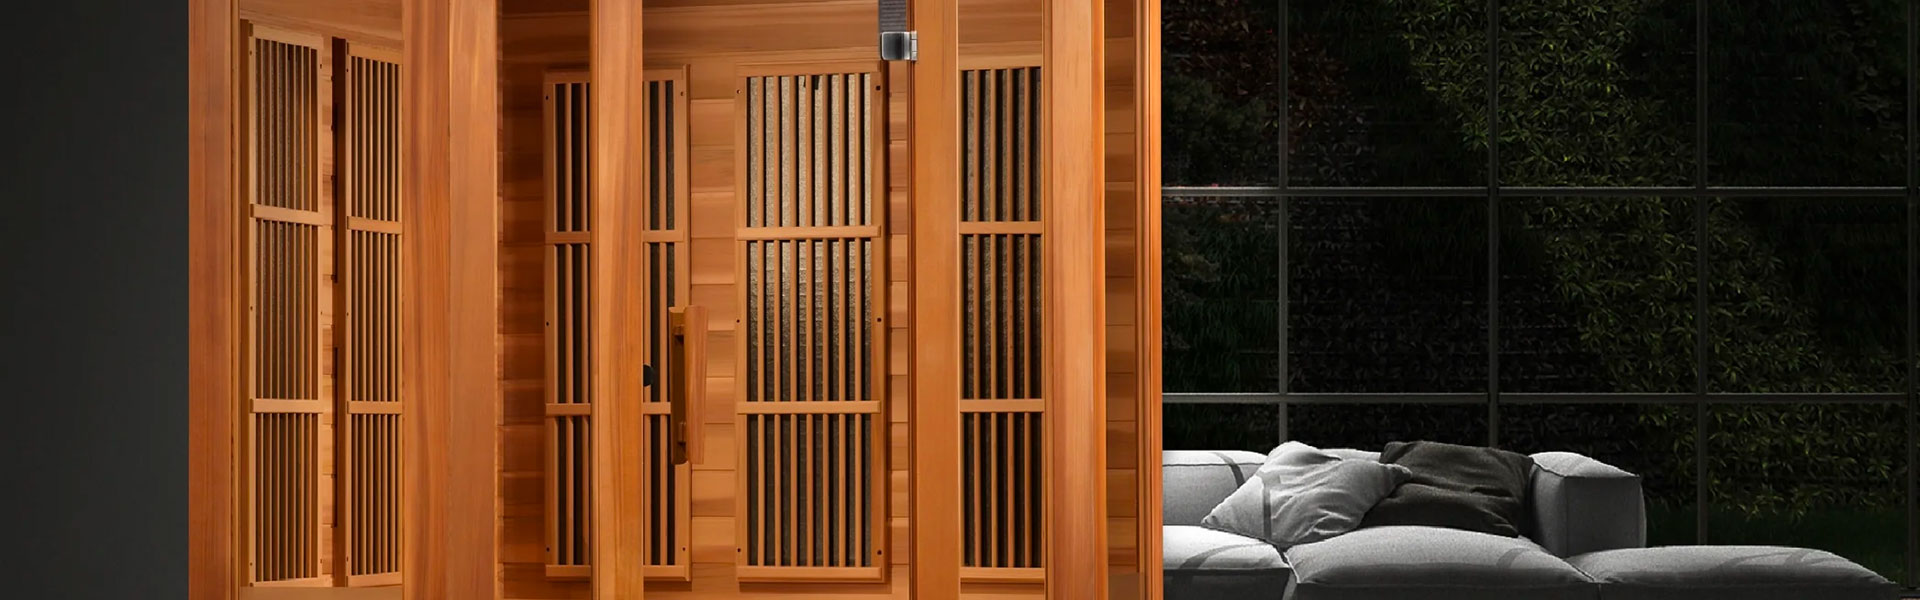 Don’t Get Caught In The Cold – Invest In An At-Home Sauna This Fall!